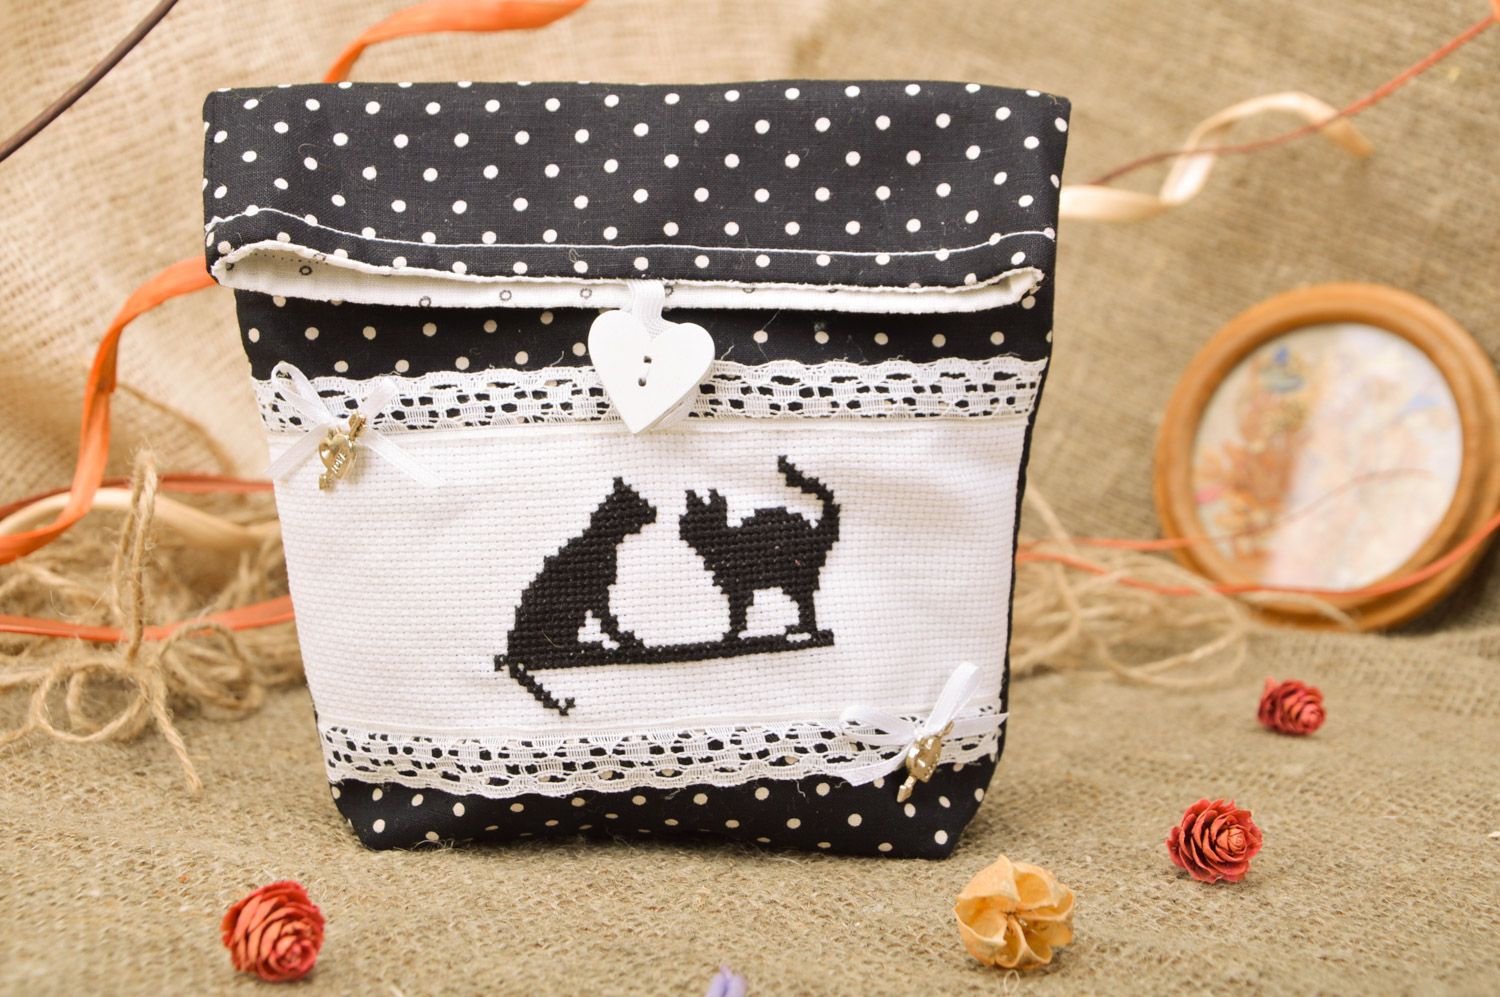 Handmade cosmetics bag sewn of polka dot cotton with cross stitch embroidery  photo 1